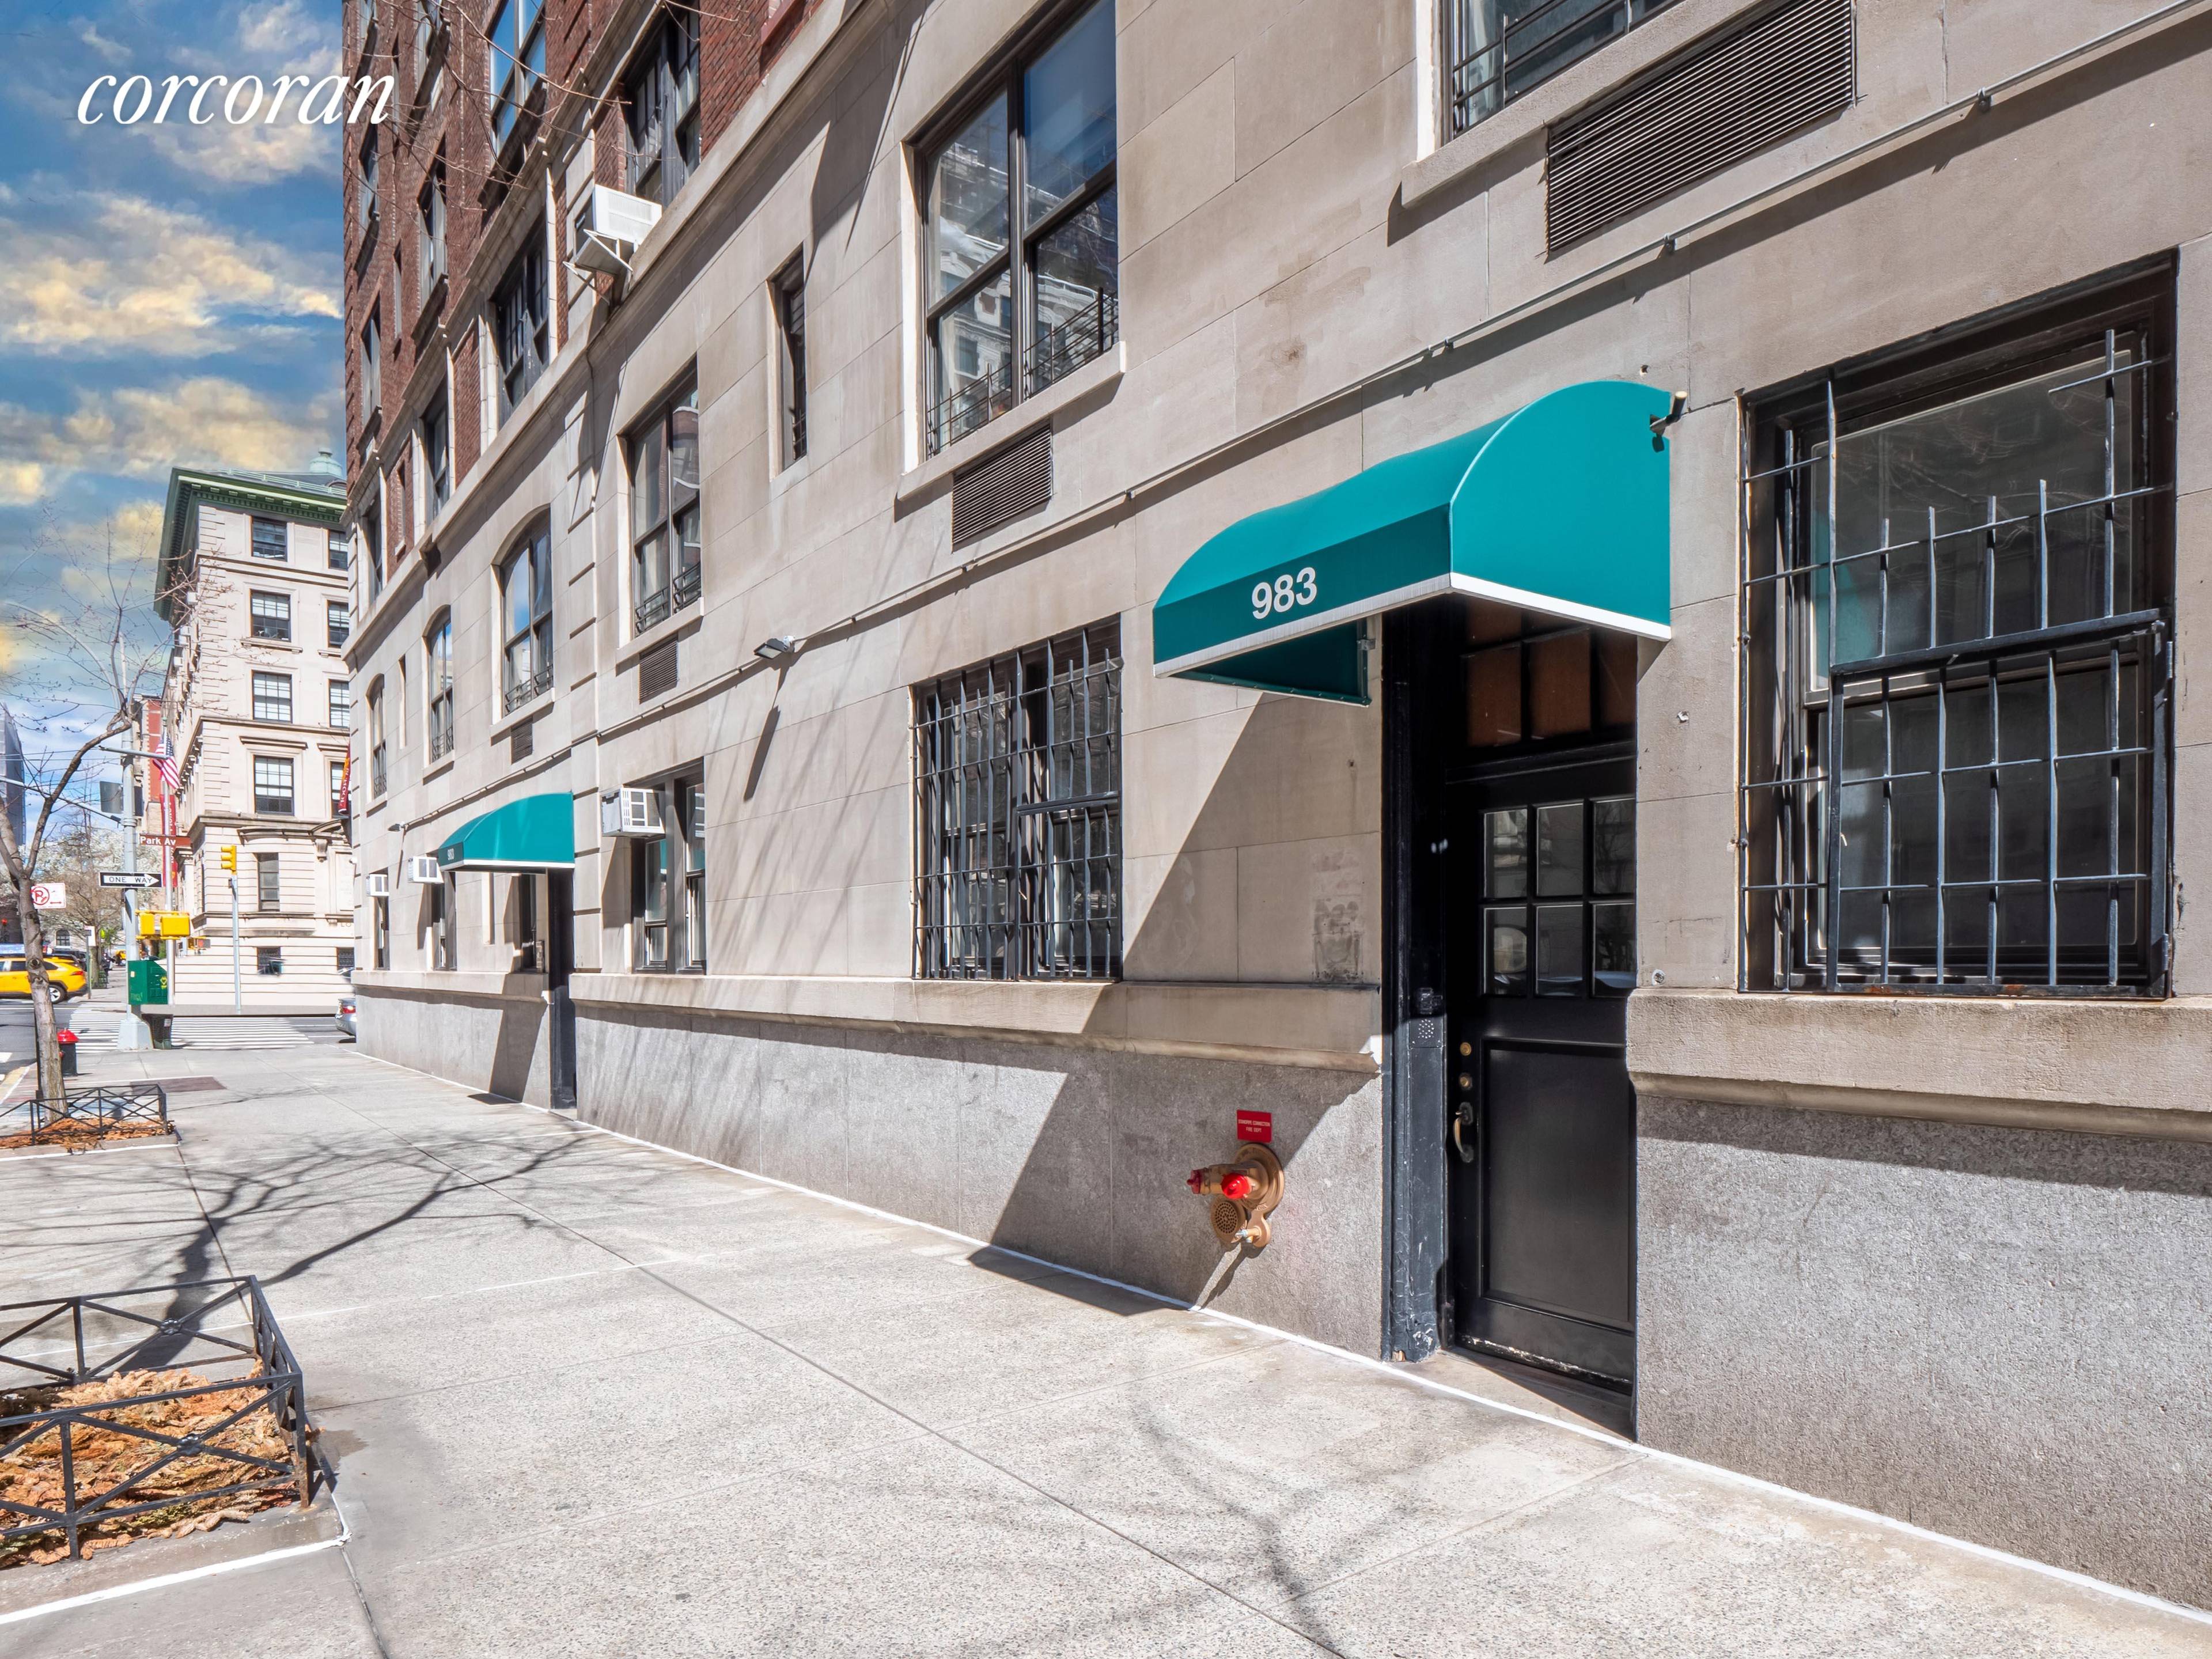 983 Park Ave, Suite 1C is a prime Upper East Side medical professional office available for lease on the corner of Park Avenue and East 83rd Street.